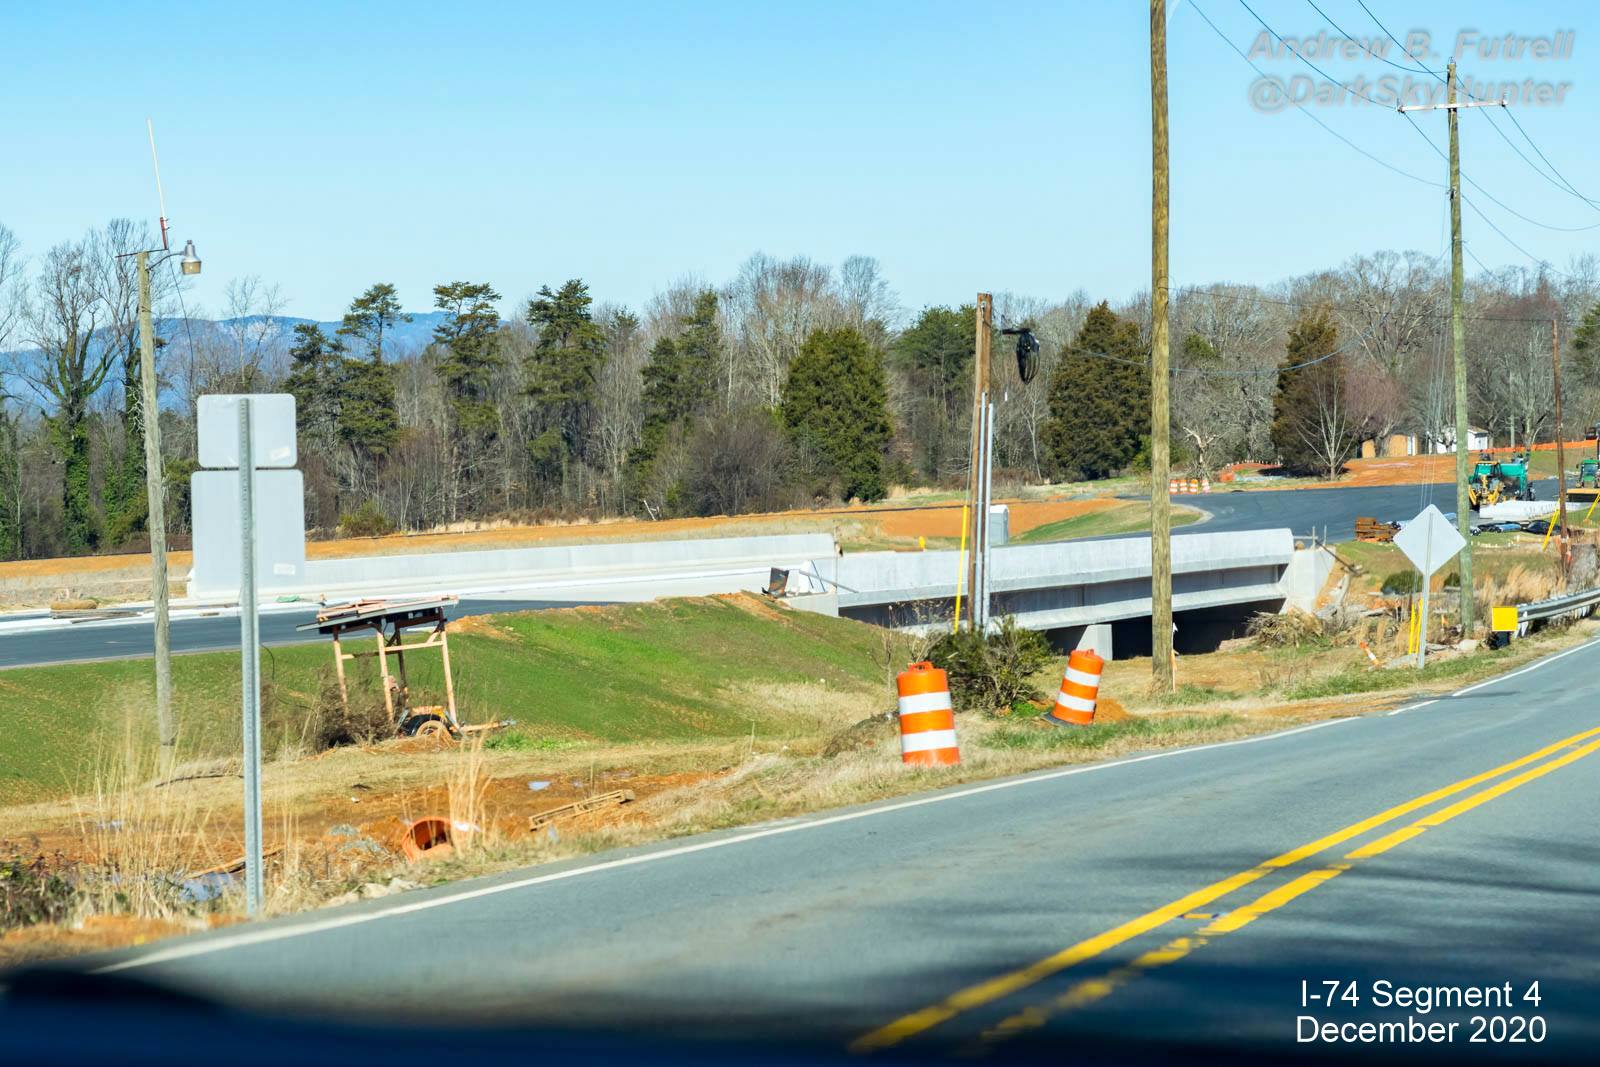 Nearly completed bridge over future Beltway lanes, by Andrew B. Futrell, December 2020